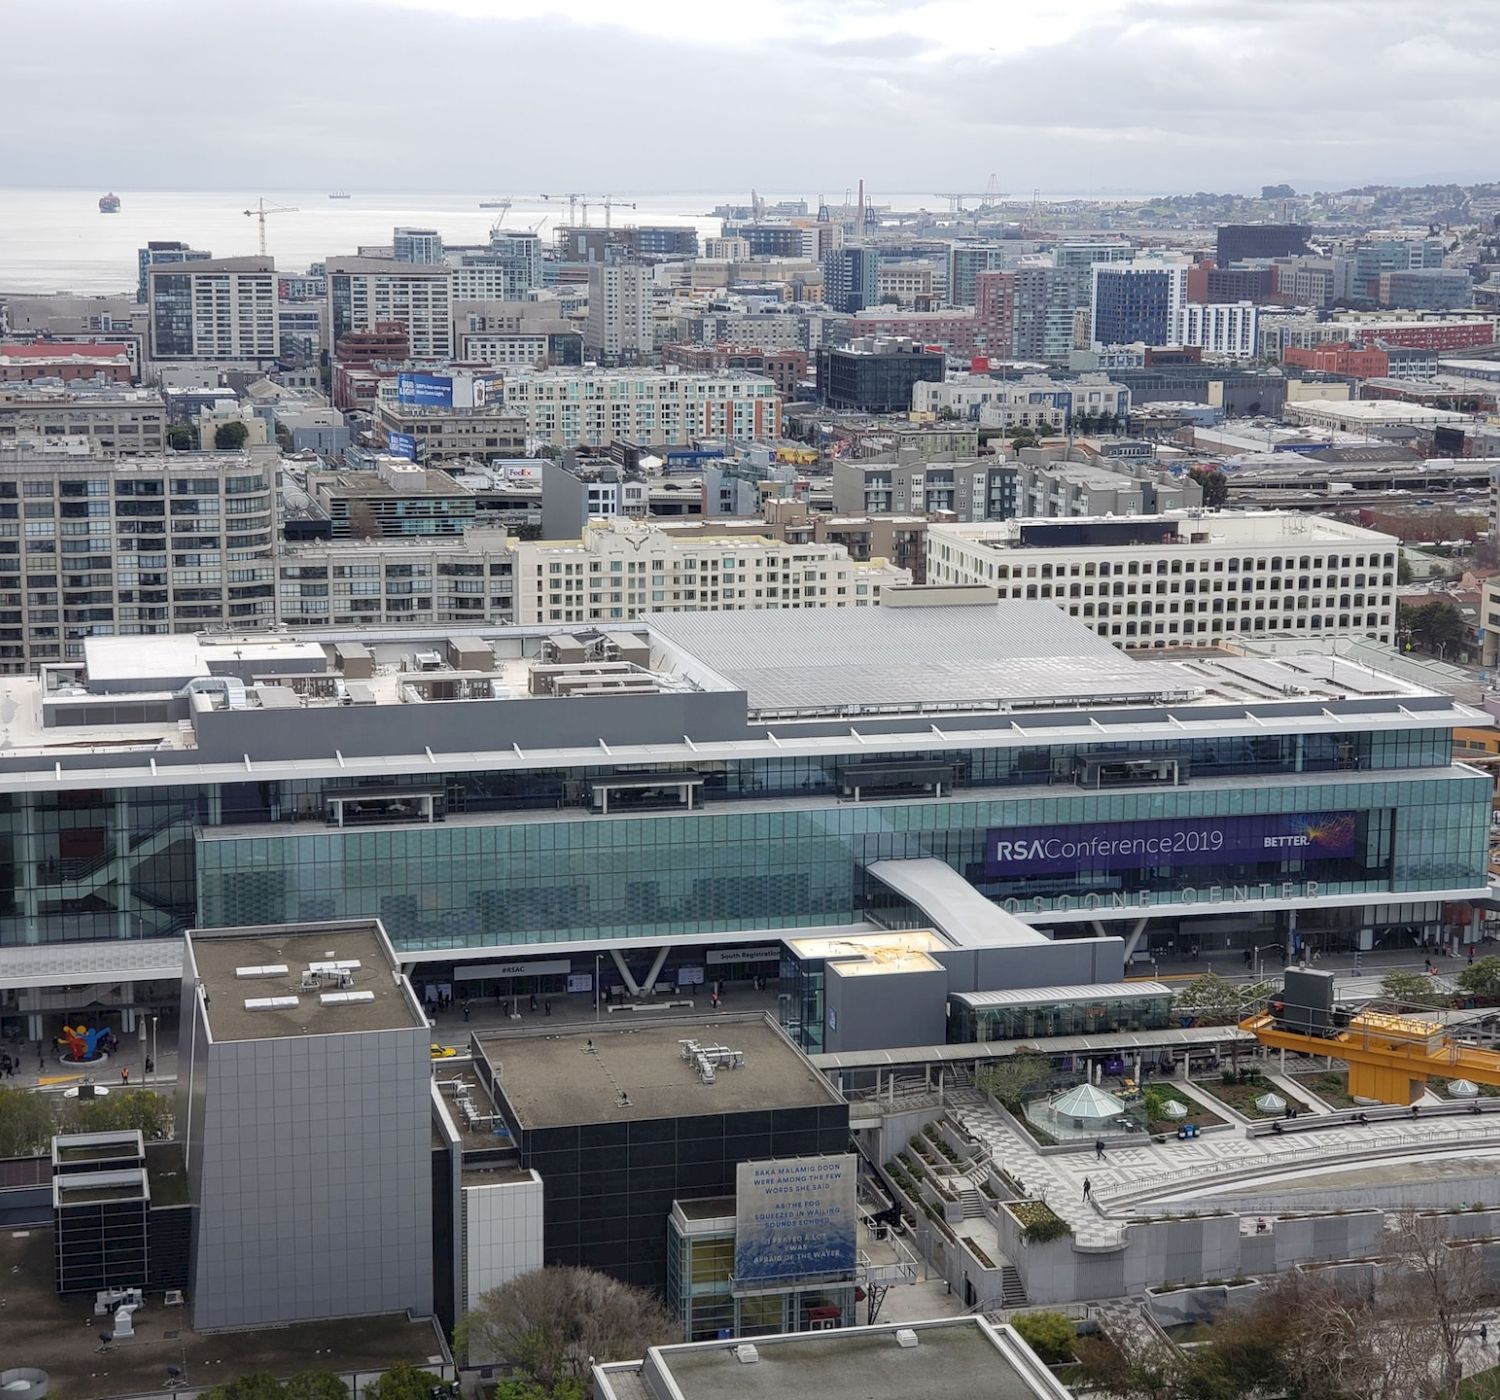 This aerial view shows a large convention center building in a bustling city with numerous surrounding buildings and a distant waterfront.